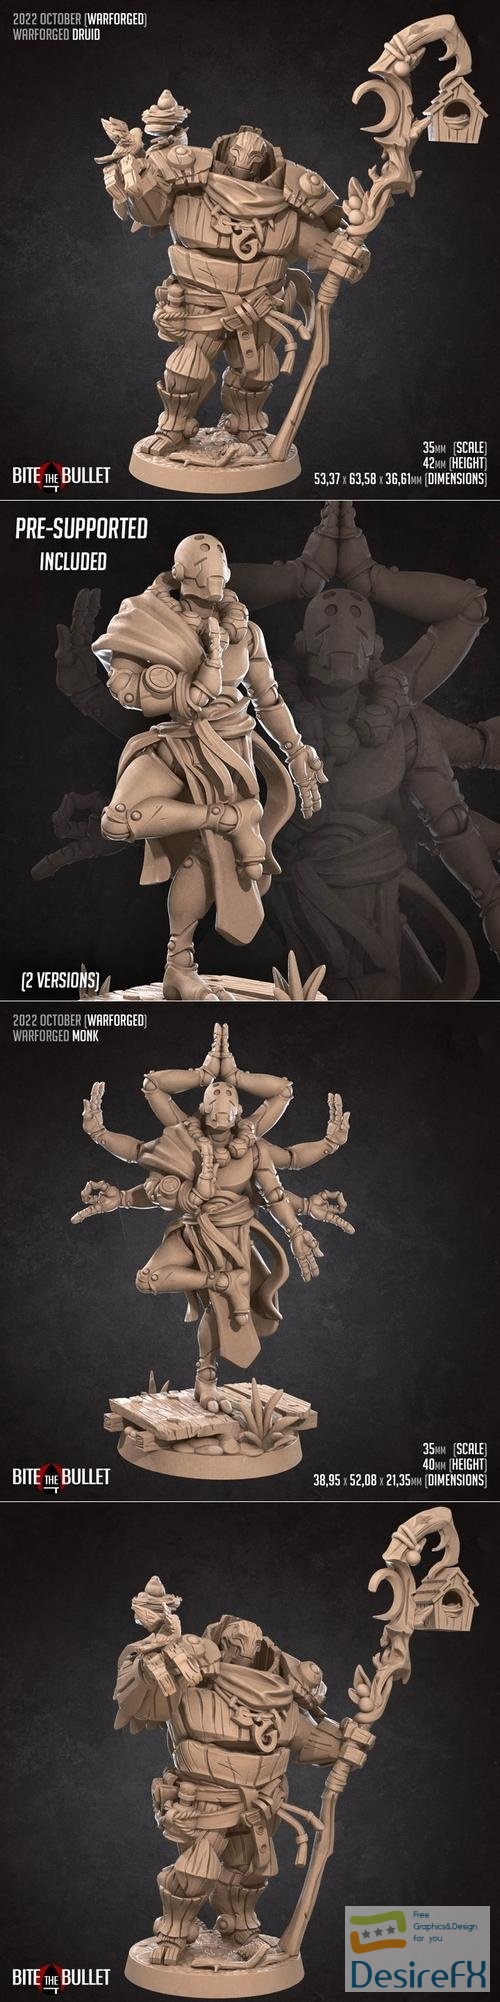 Warforged Monk and Druid – 3D Print